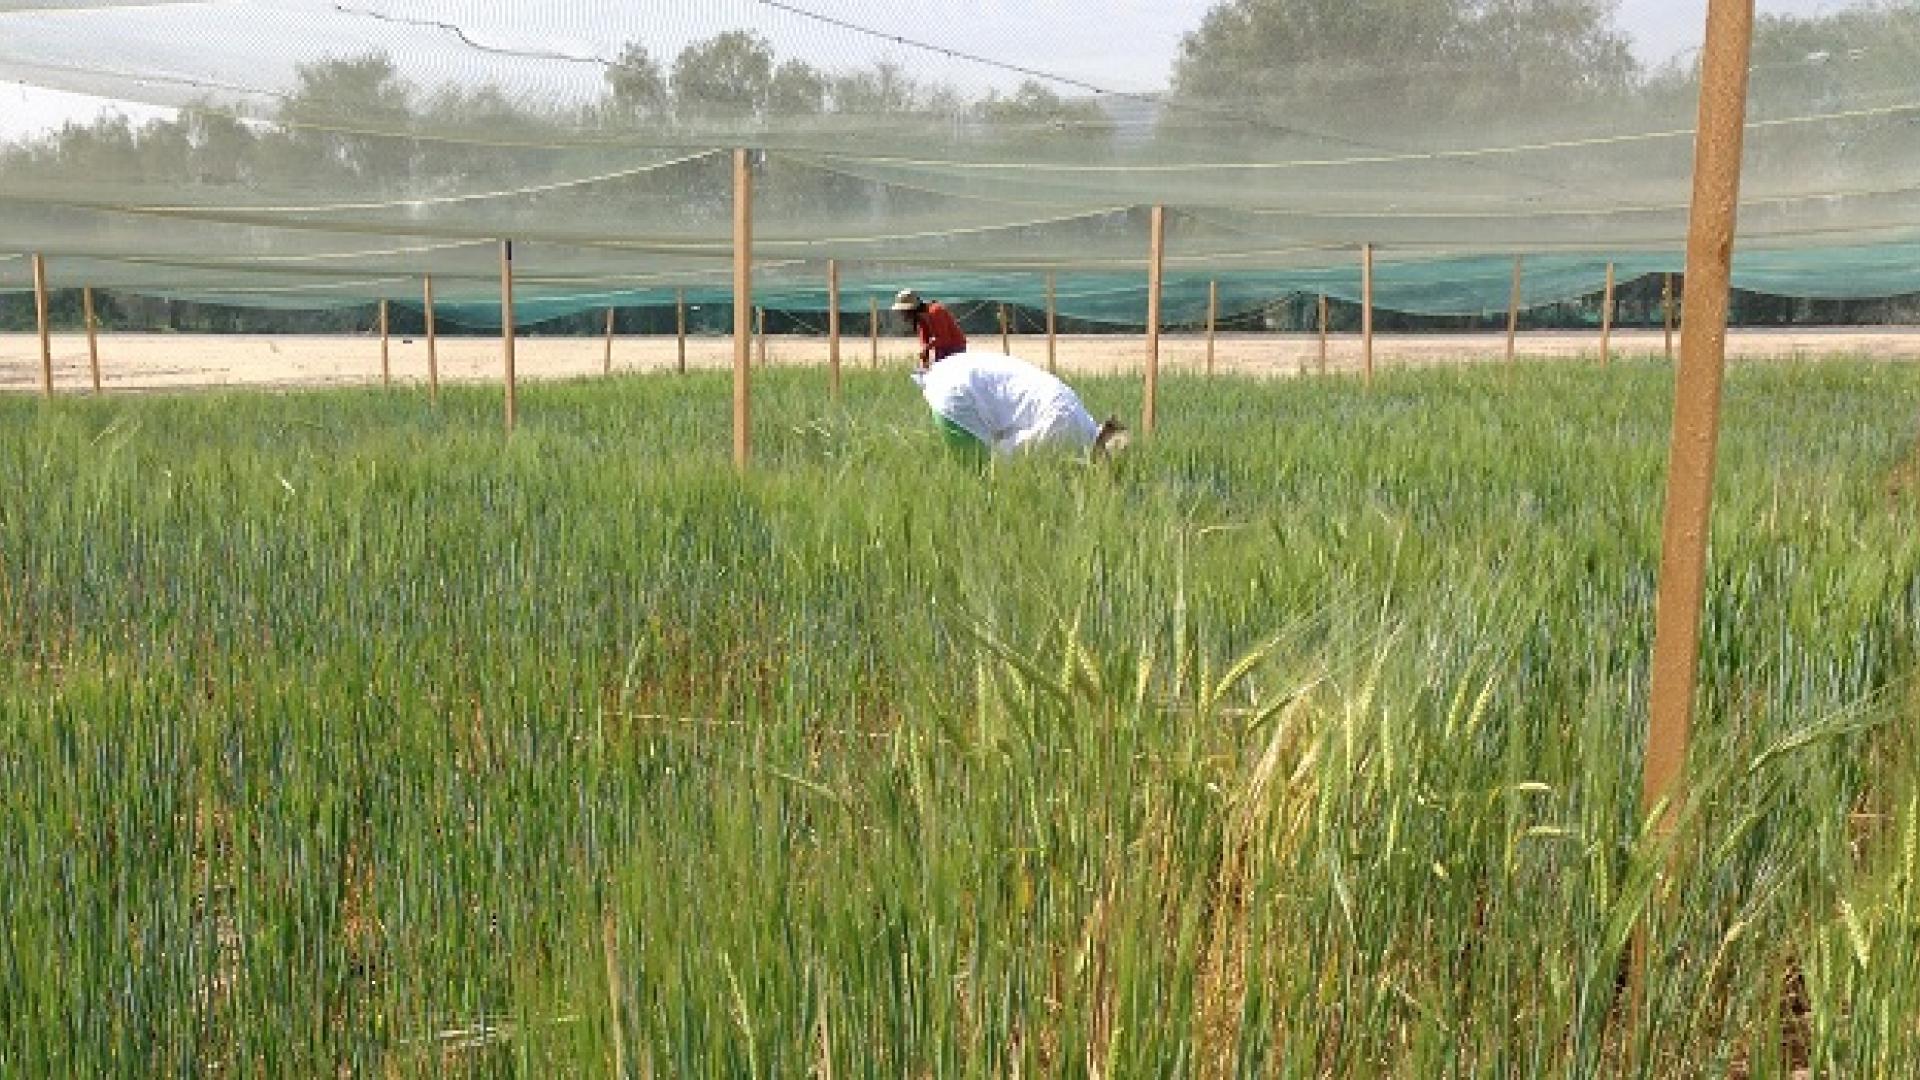 KAUST CEMSE ES STAT AMCS Plant Scientists Collect Data From The Barley Plants